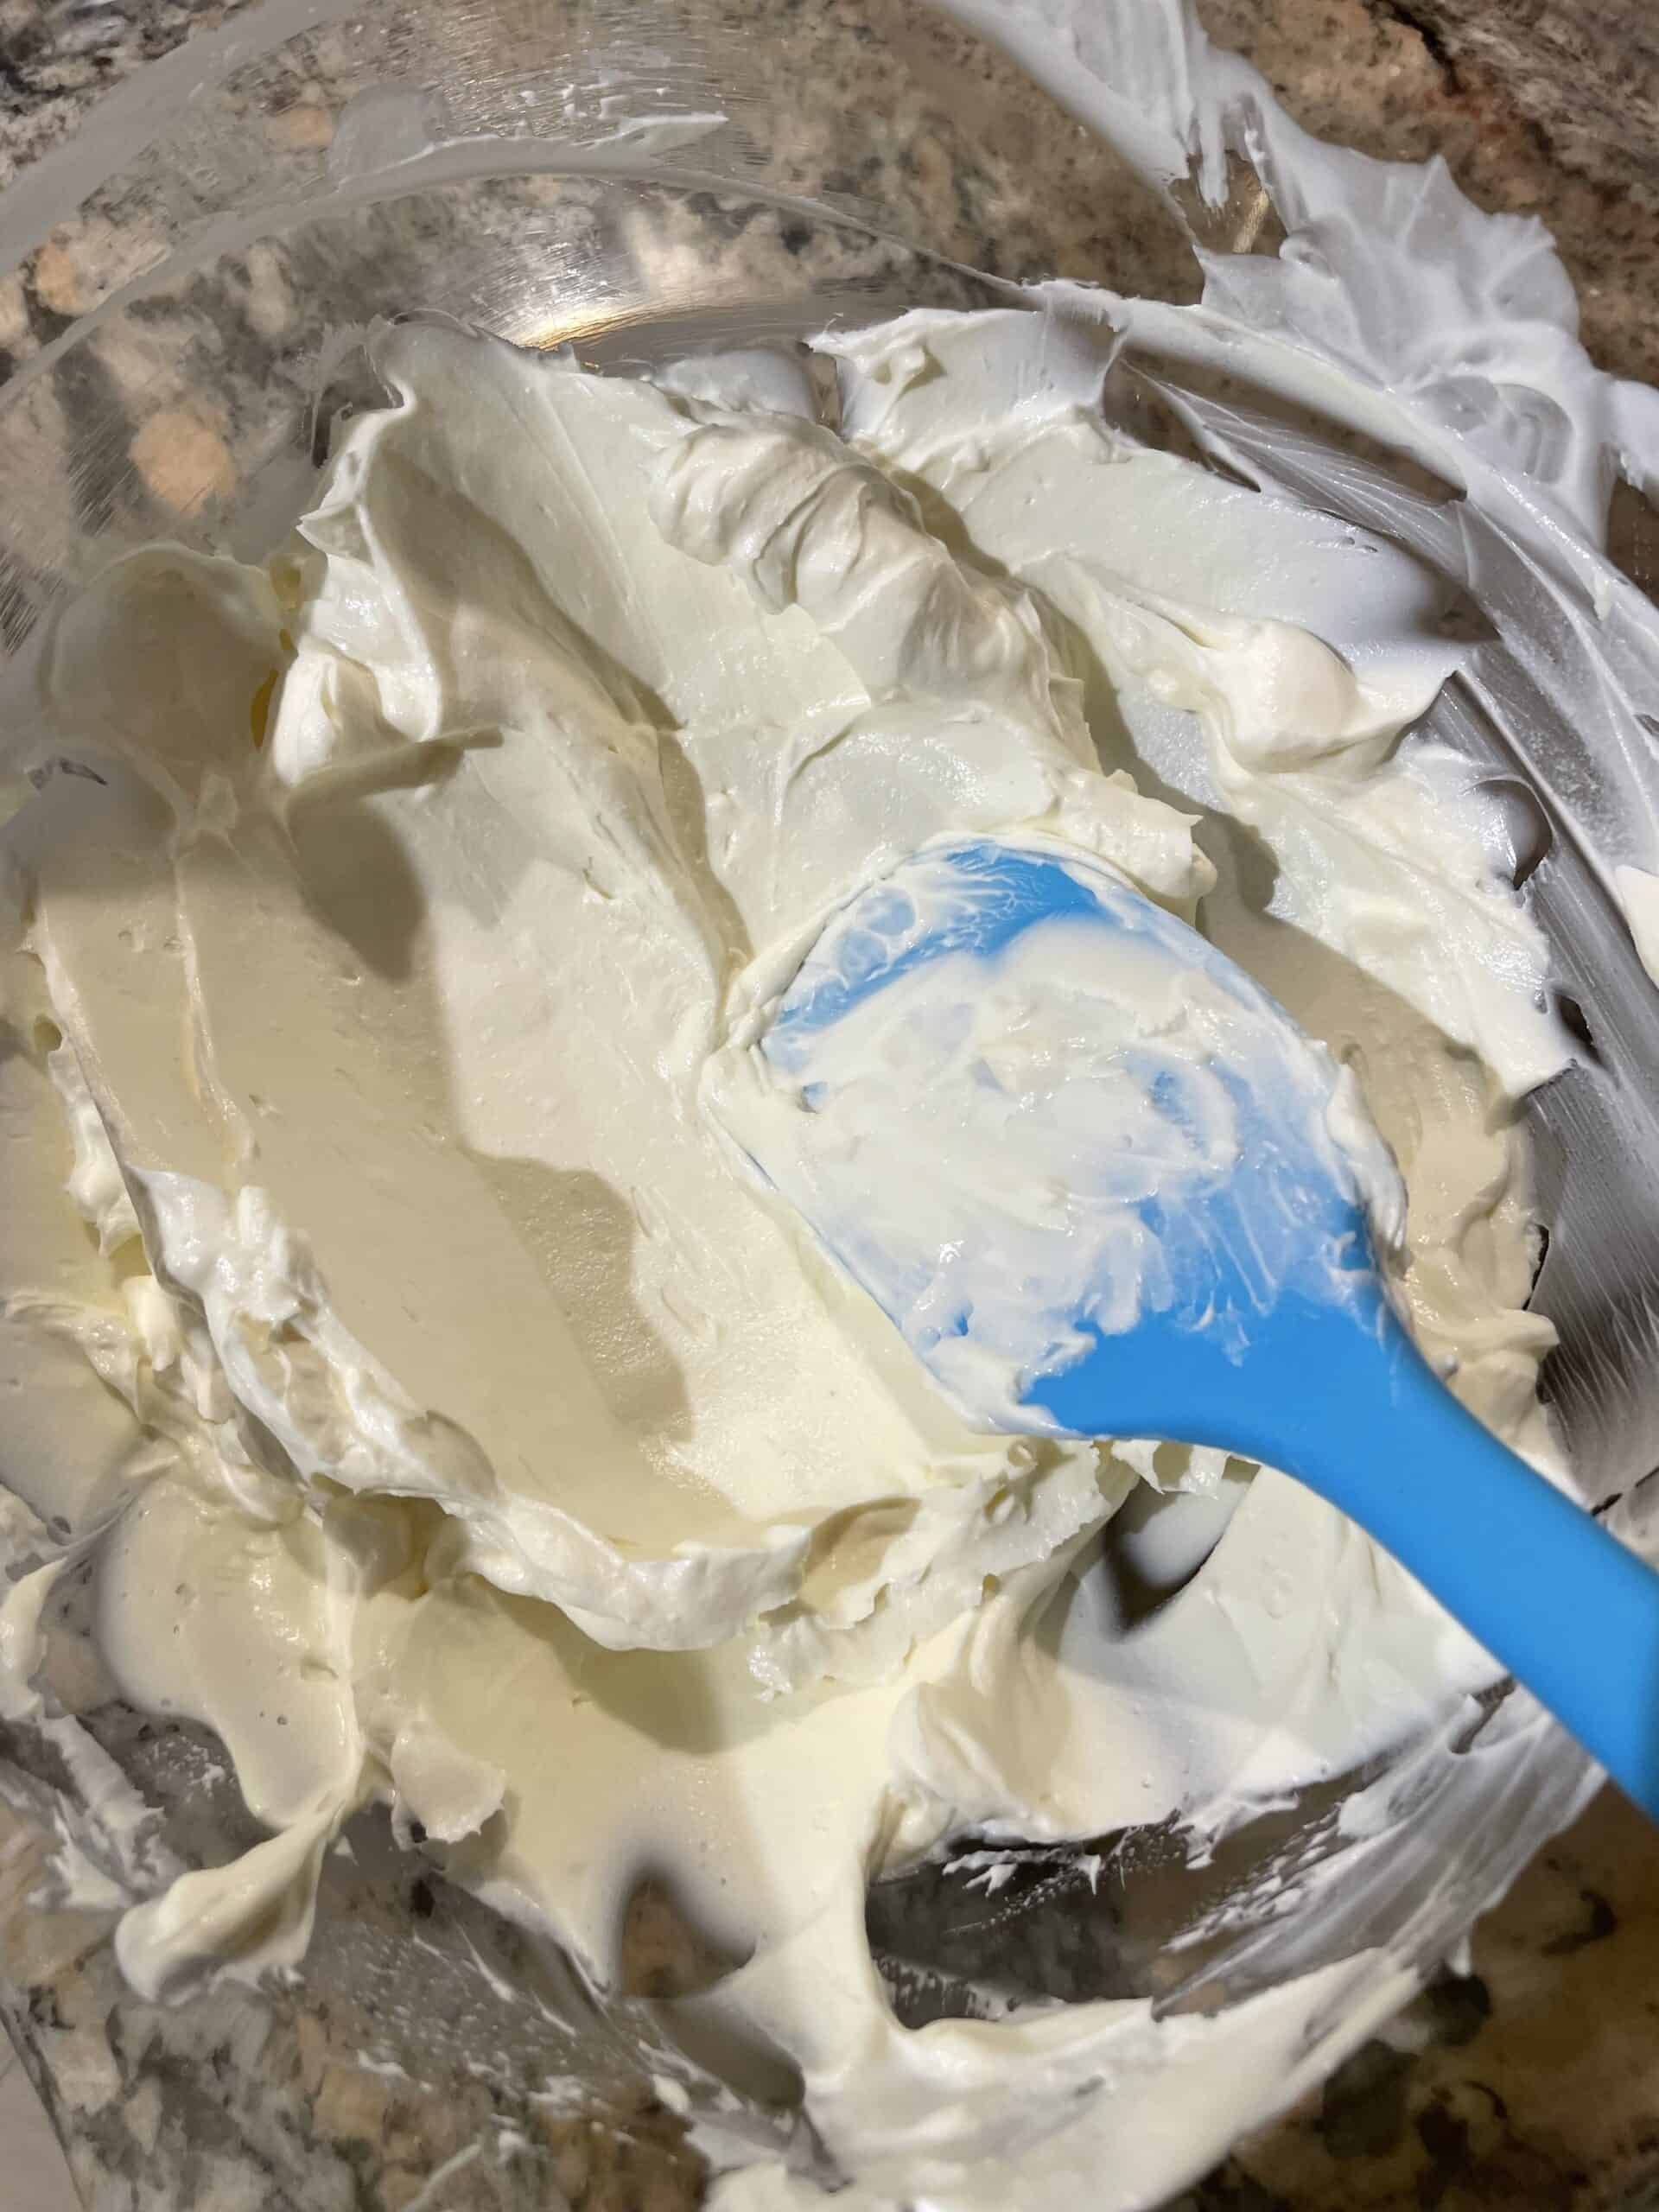 Mixing Sour Cream and Cream Cheese until smooth and creamy.